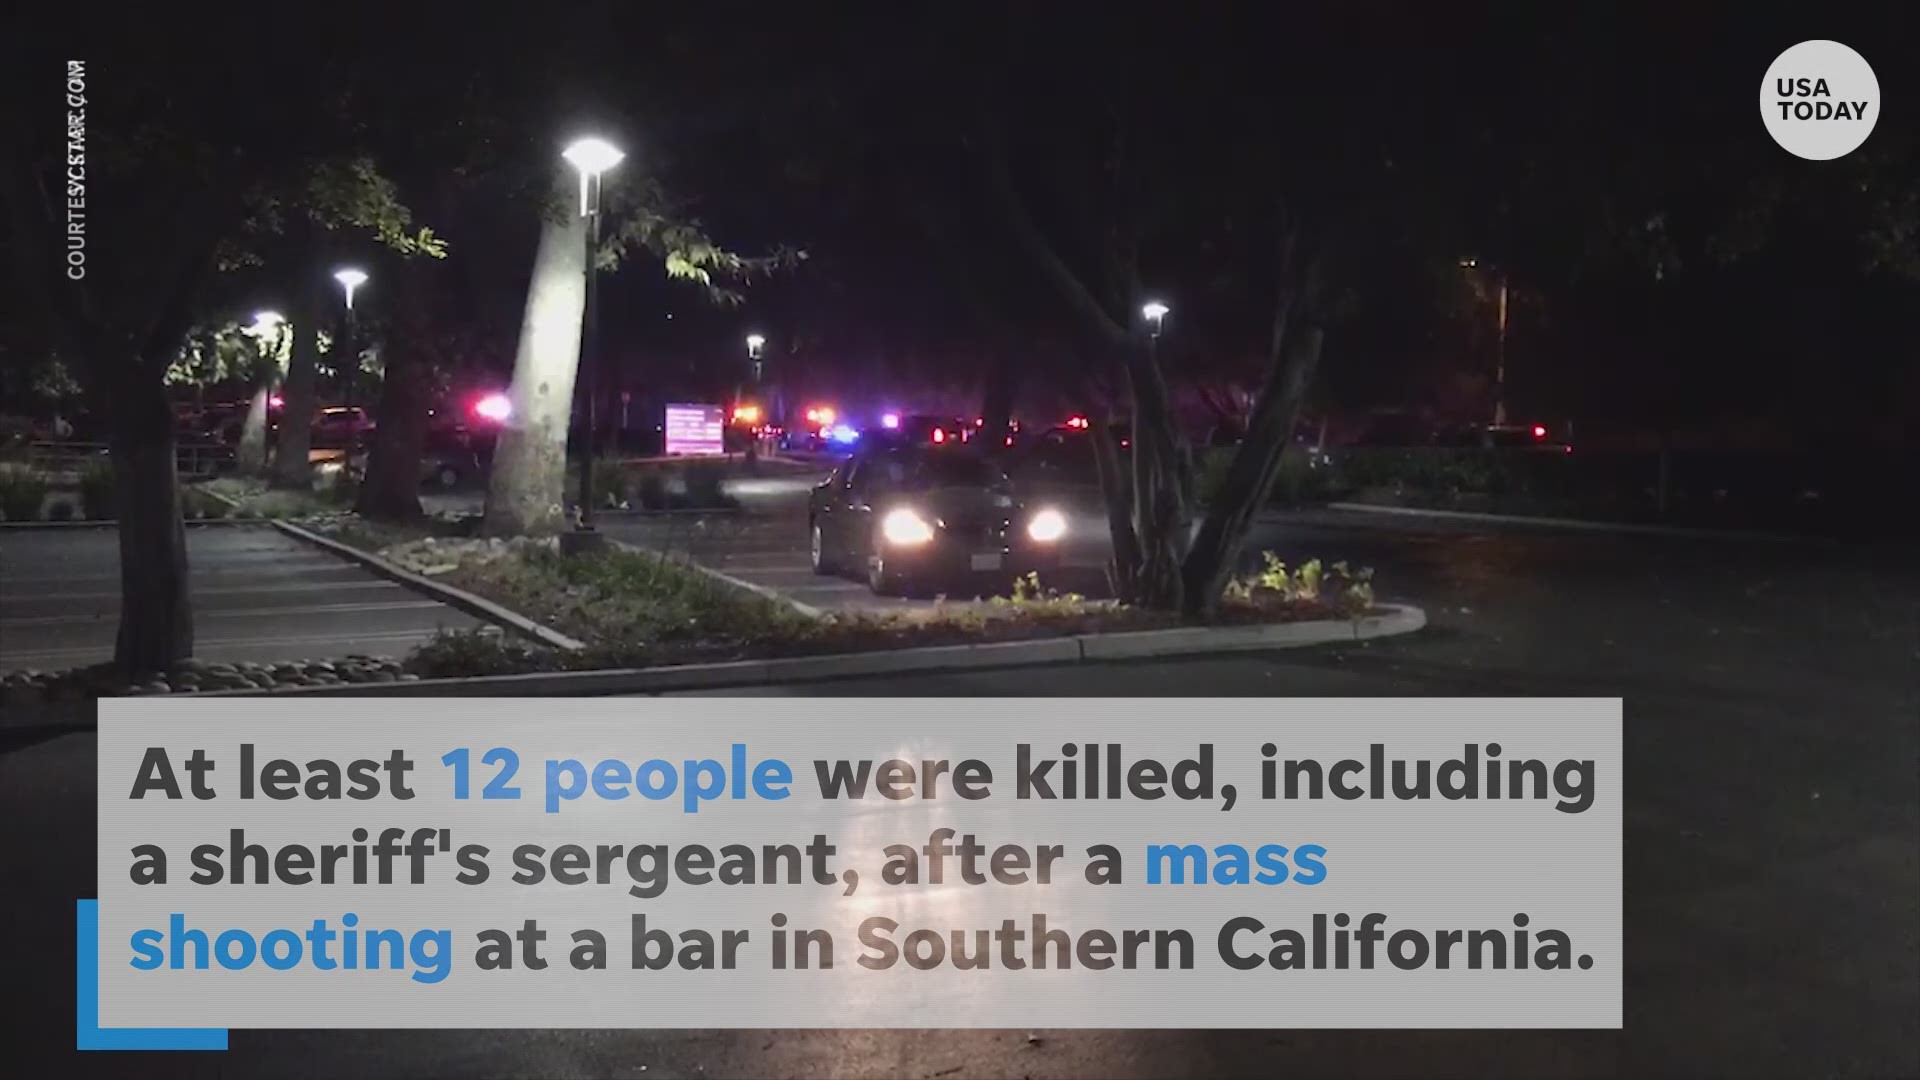 A gunman opened fire on a country dance bar popular with college students in Southern California, killing 11 people and a sheriff's sergeant. The shooter also died.